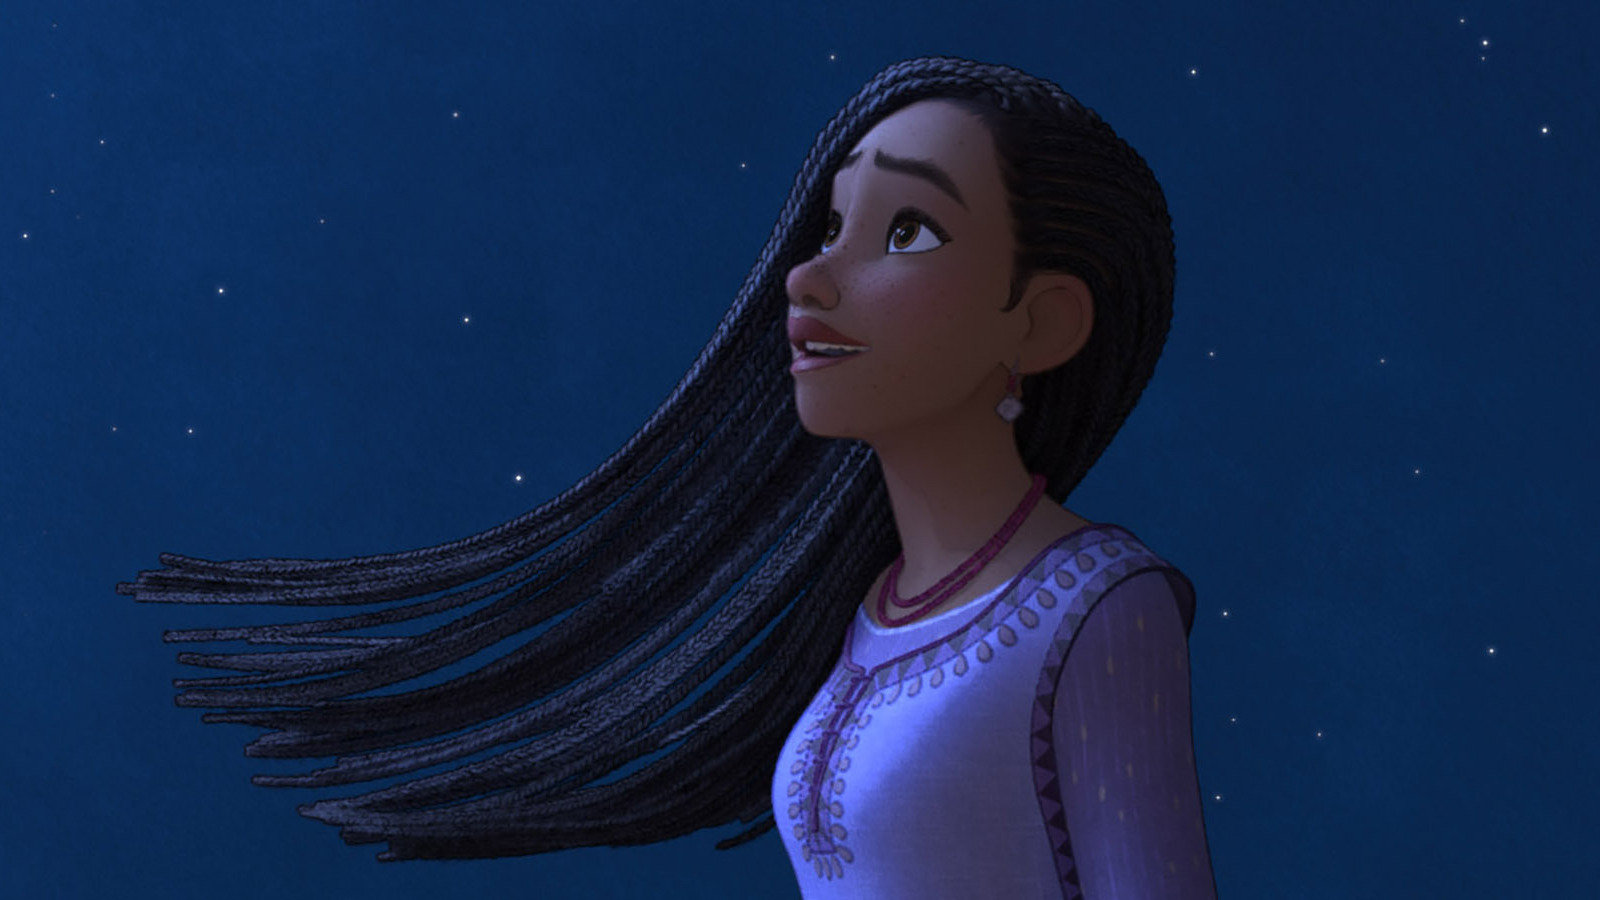 Disney 'Wish' movie: Exclusive sneak peek at new song 'I'm a Star